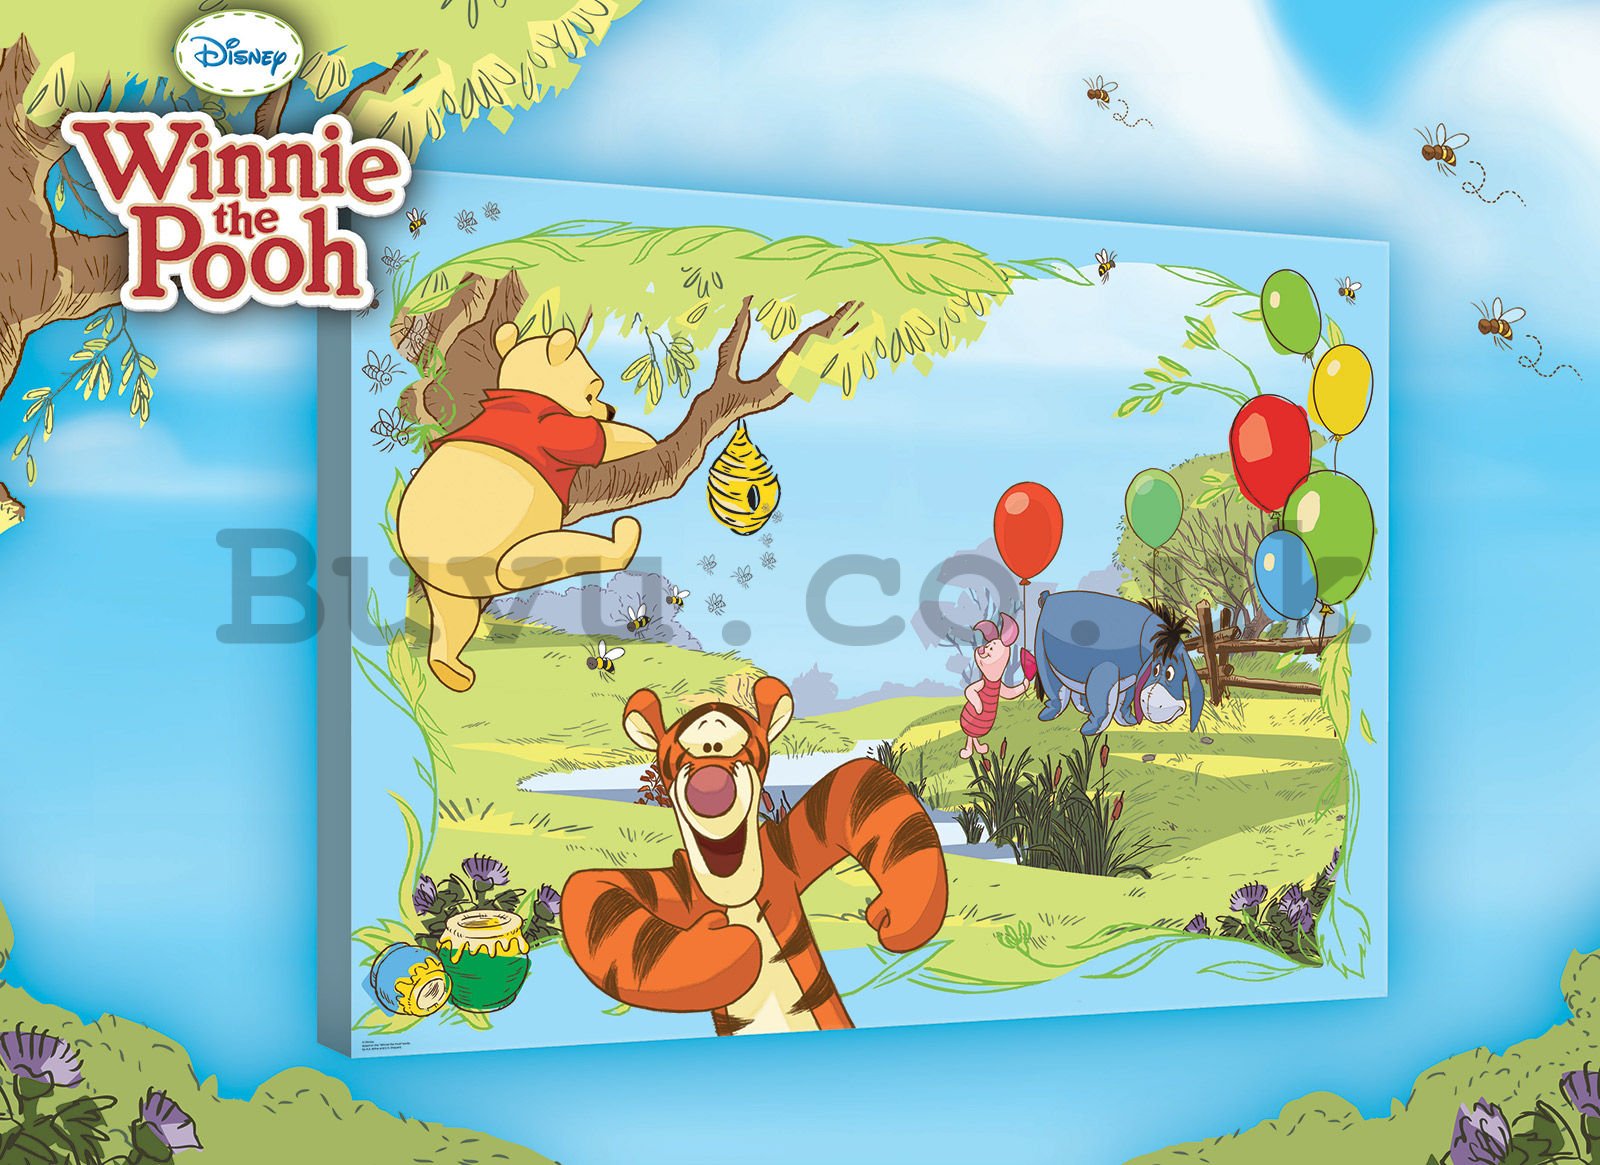 Painting on canvas: Winnie the Pooh (Balloons) - 100x75 cm